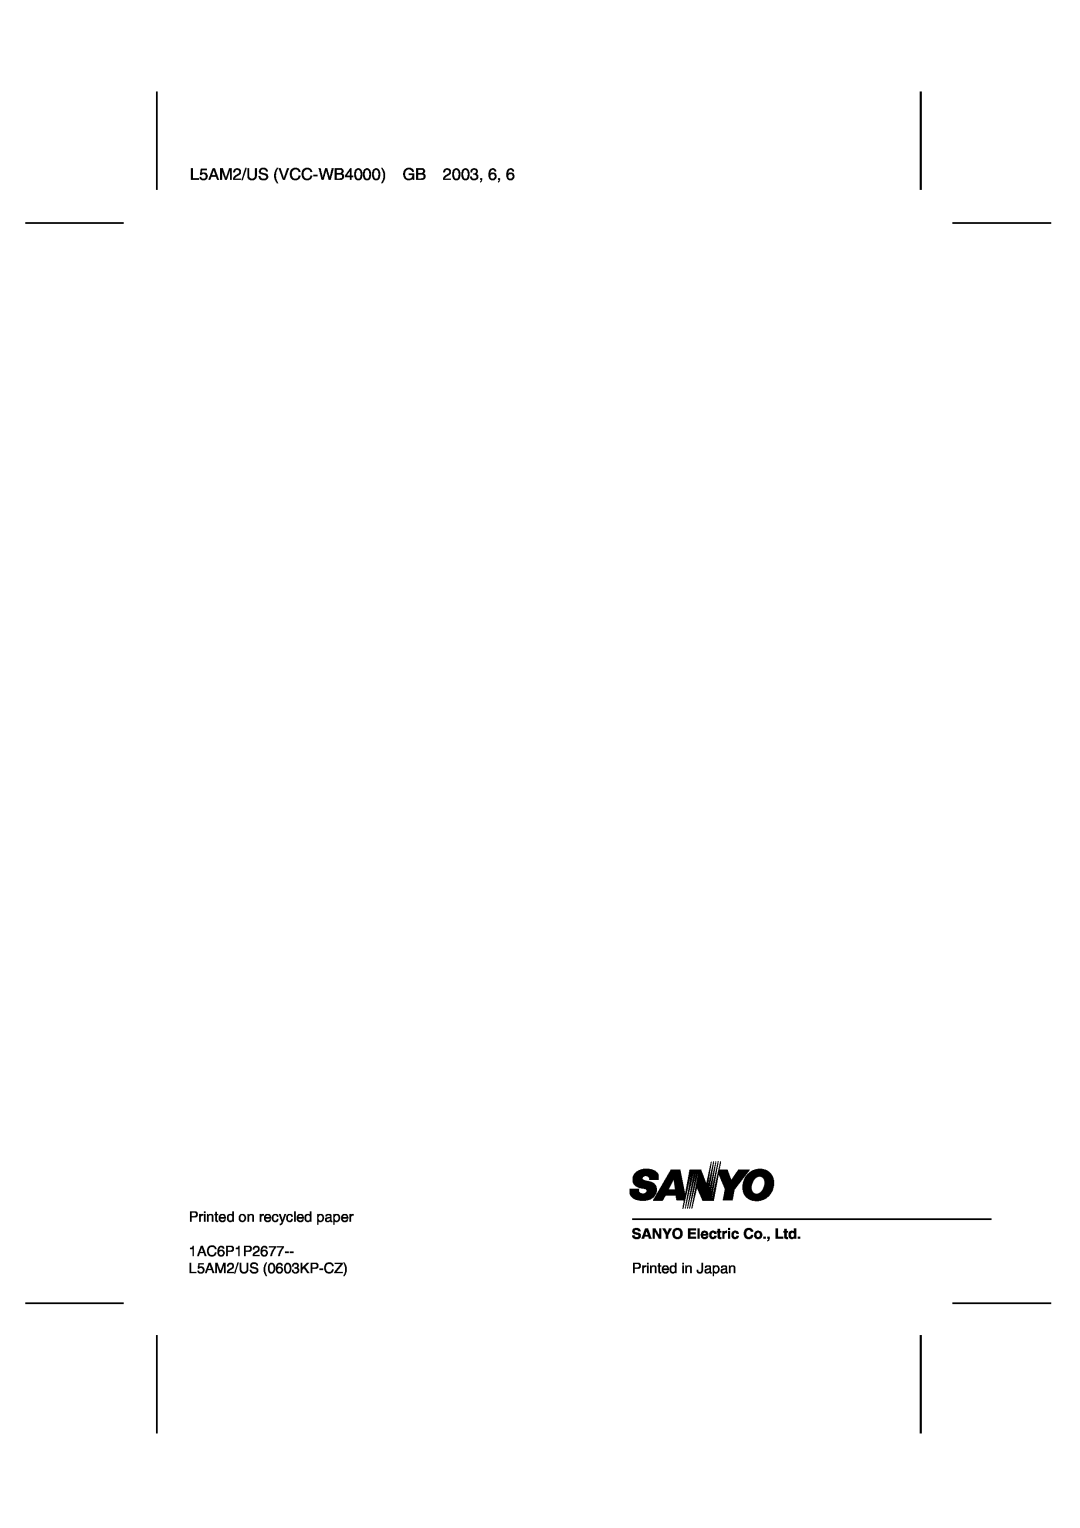 Sanyo instruction manual L5AM2/US VCC-WB4000 GB, Printed on recycled paper, 1AC6P1P2677, L5AM2/US 0603KP-CZ 